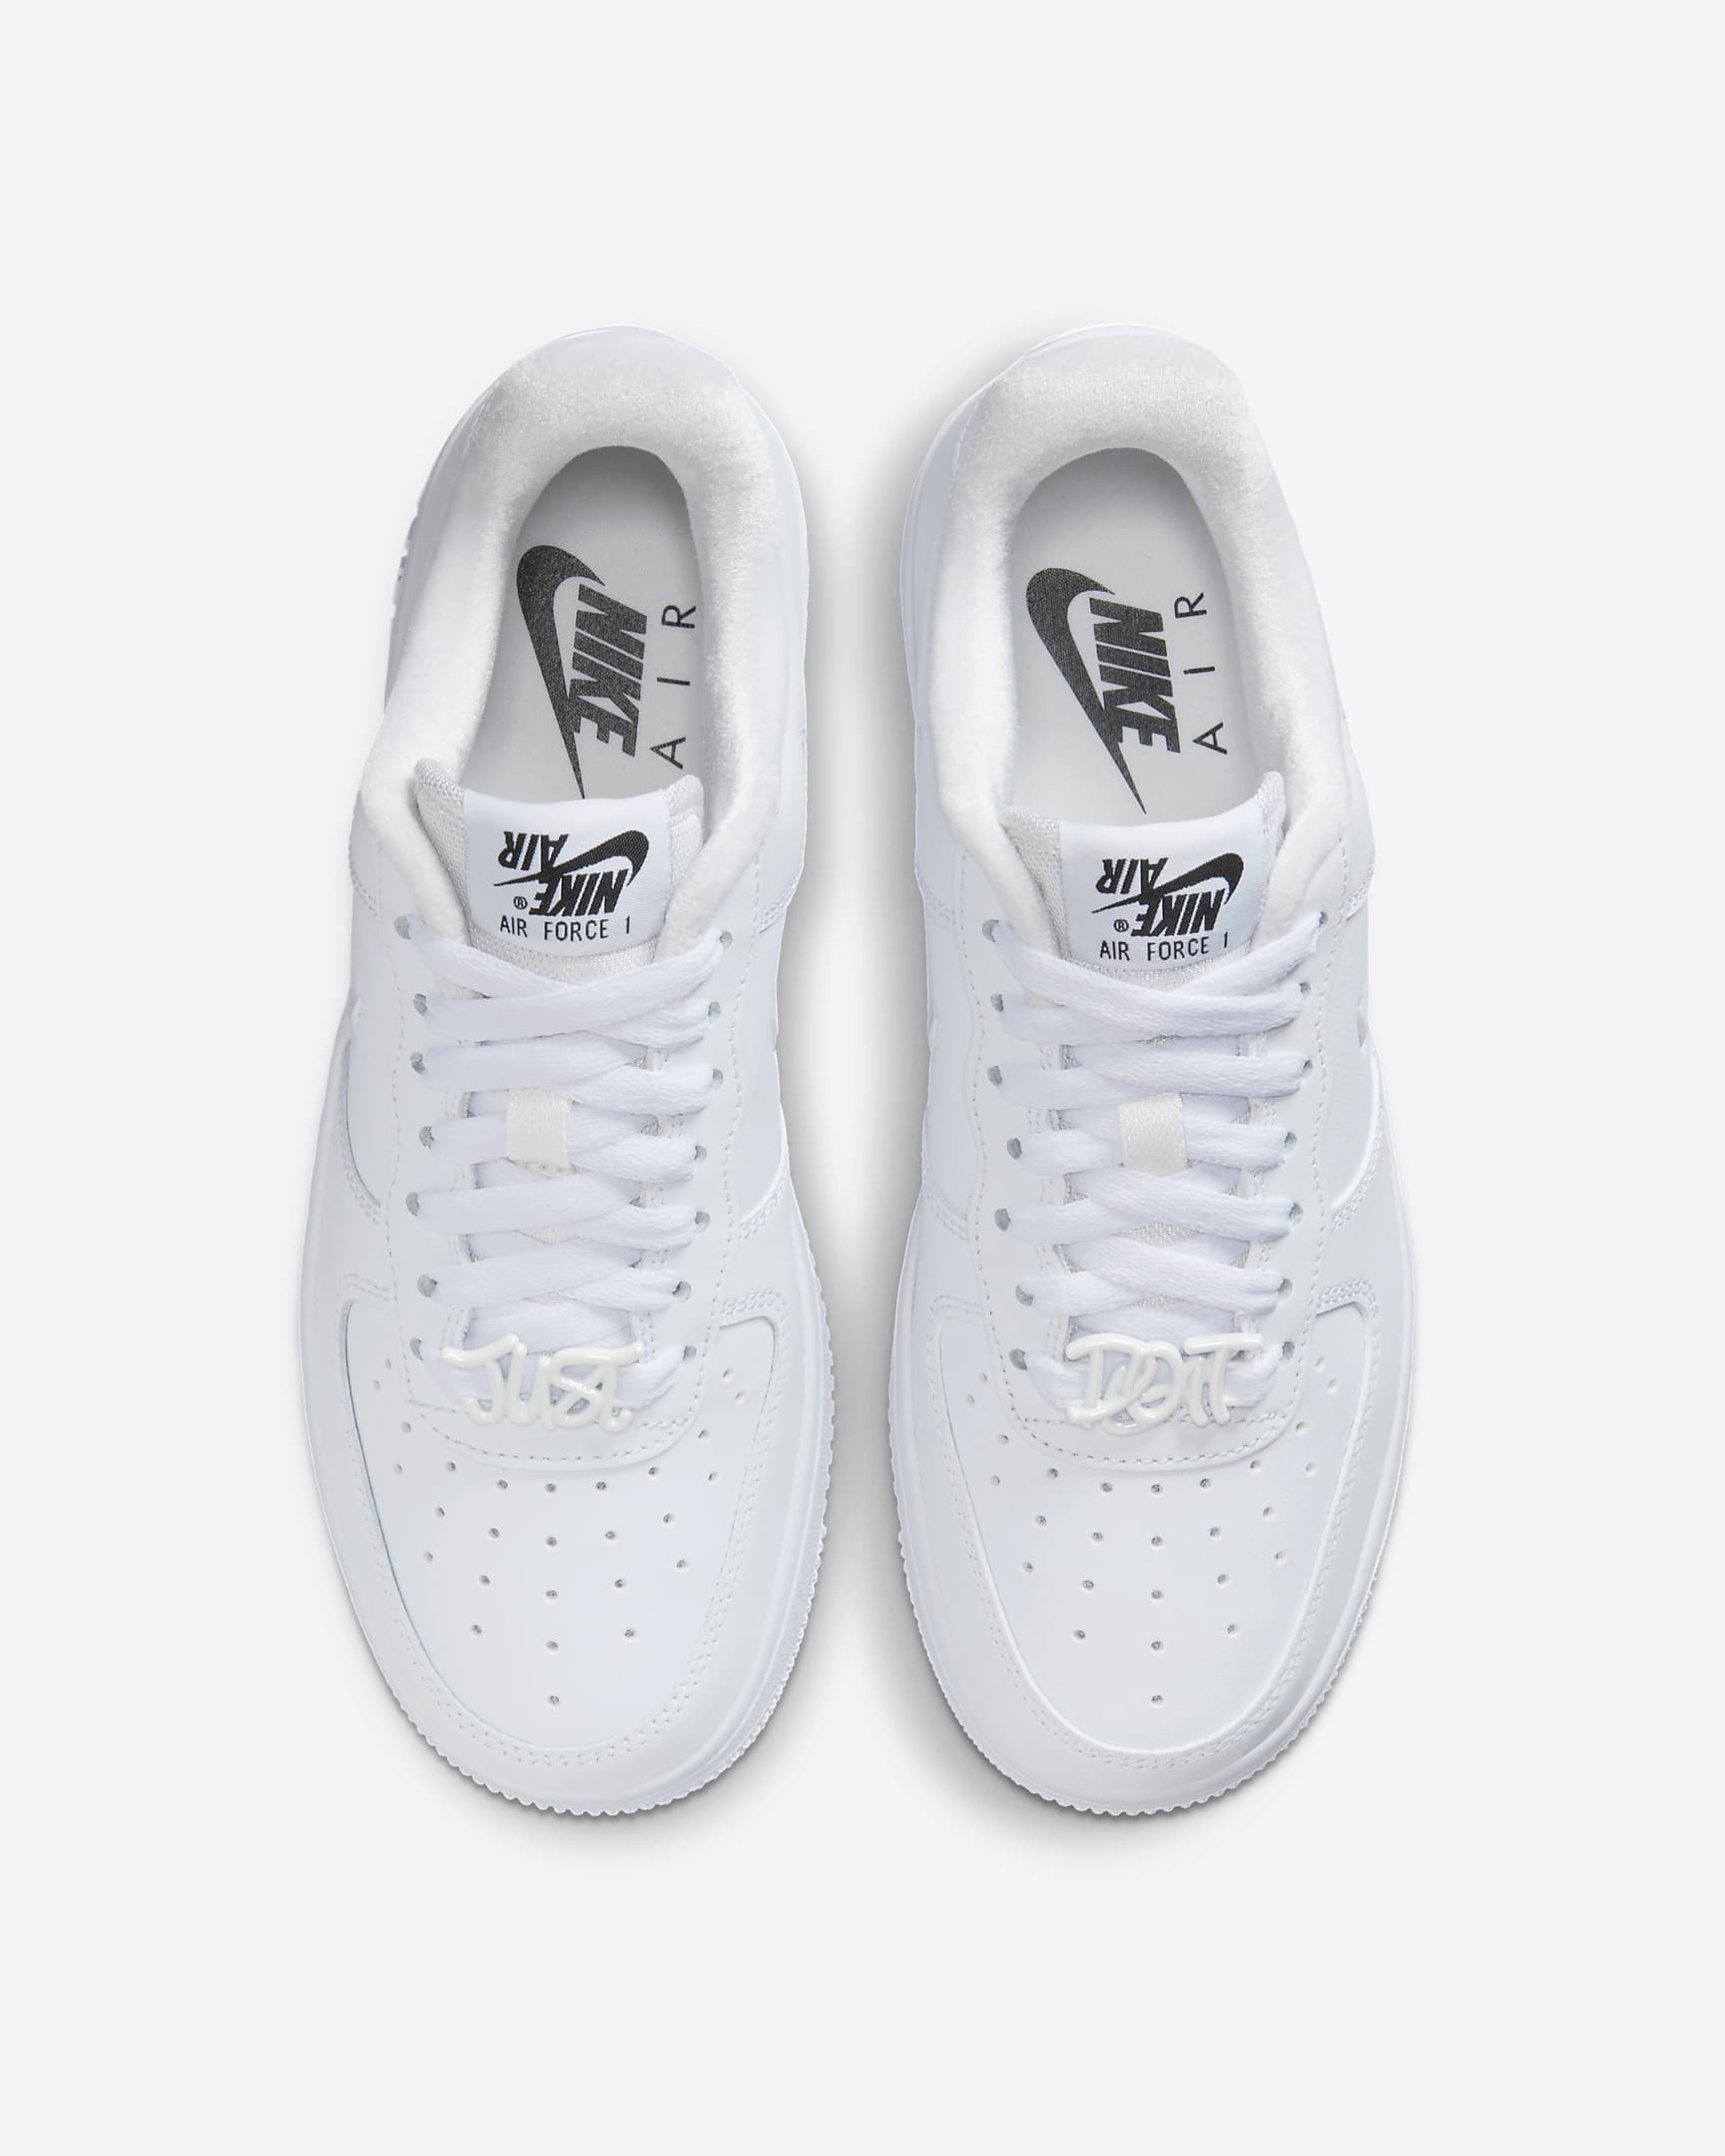 Step Up Your Style with Nike Air Force 1 ’07 Women’s Shoe Review: The Game-Changing Shoe!